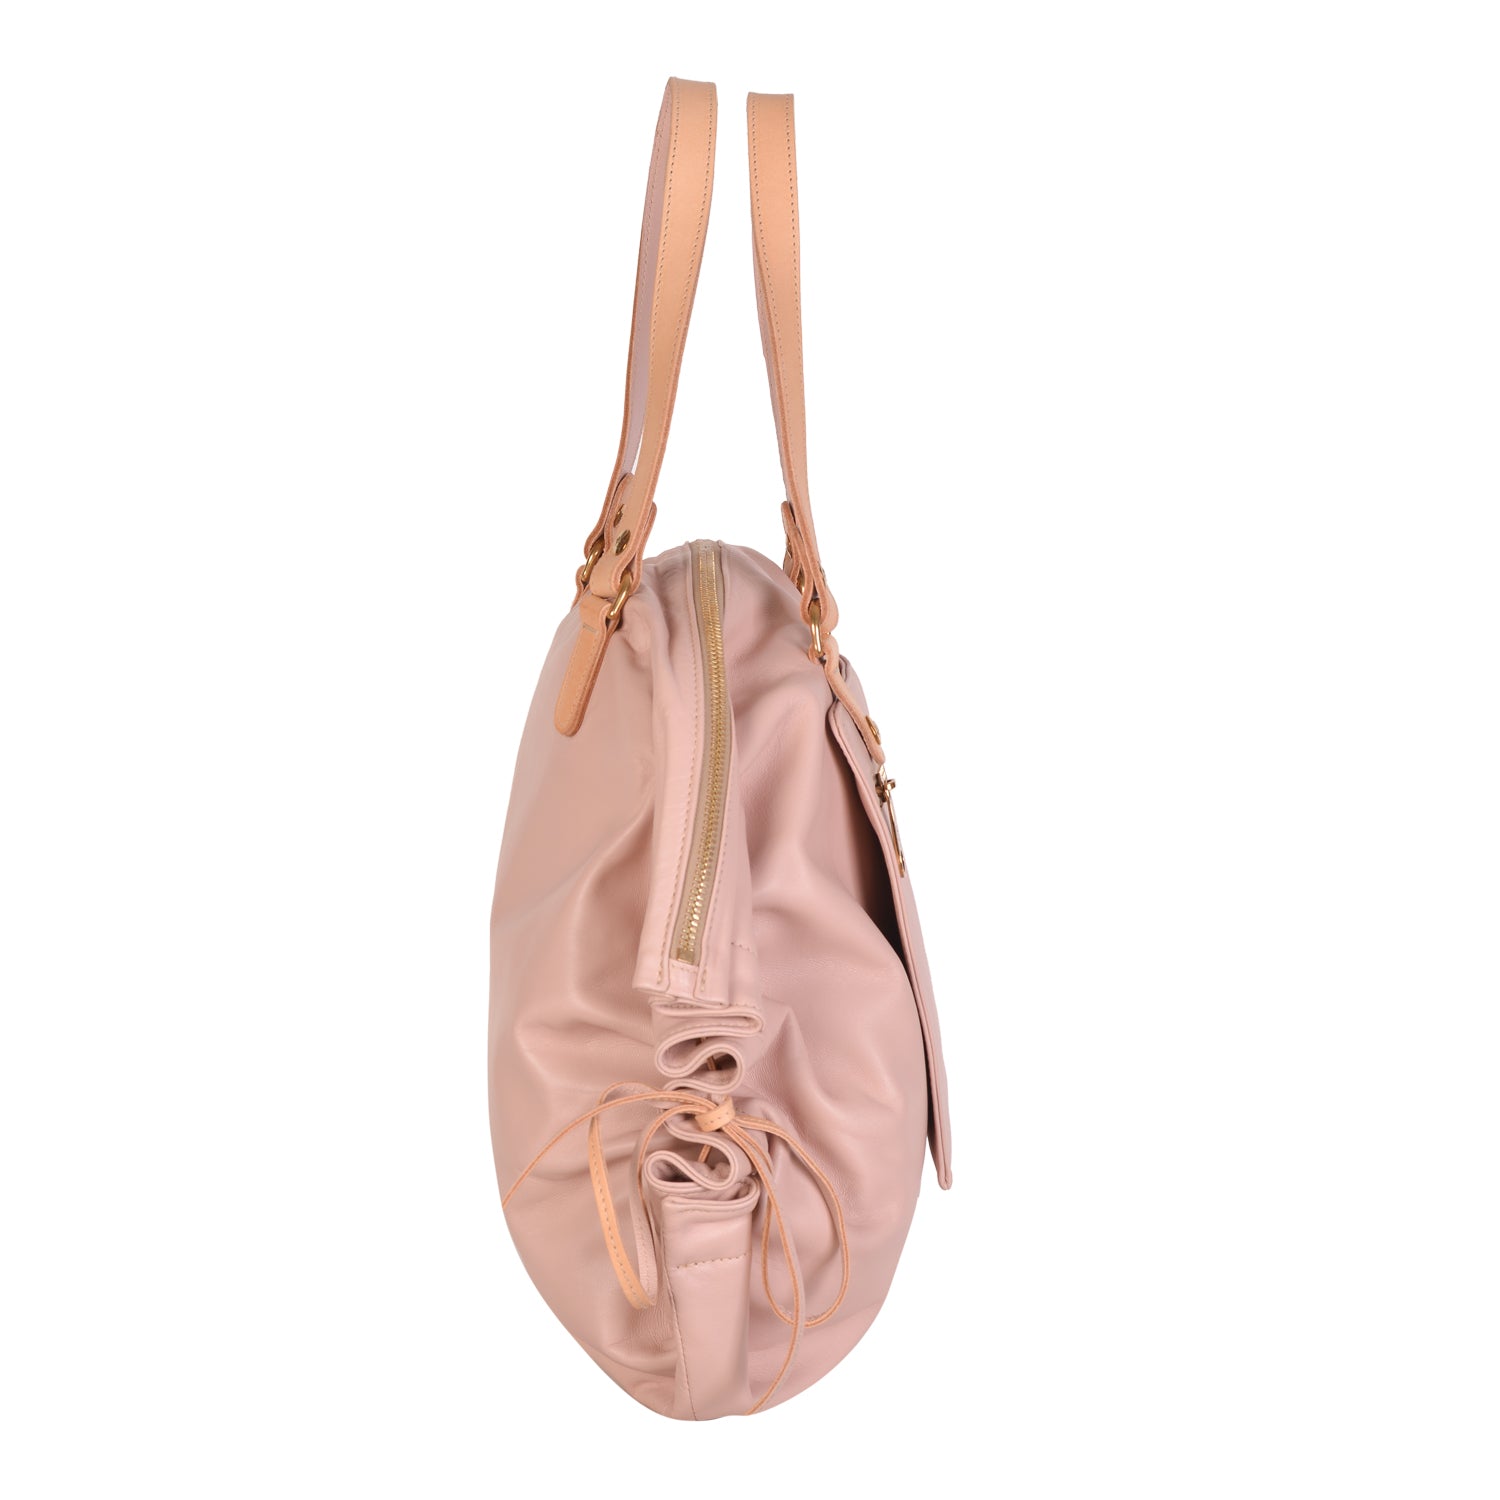 NEW IL BISONTE WOMEN'S CANDY COLLECTION SHOULDER BAG IN ROSE LEATHER